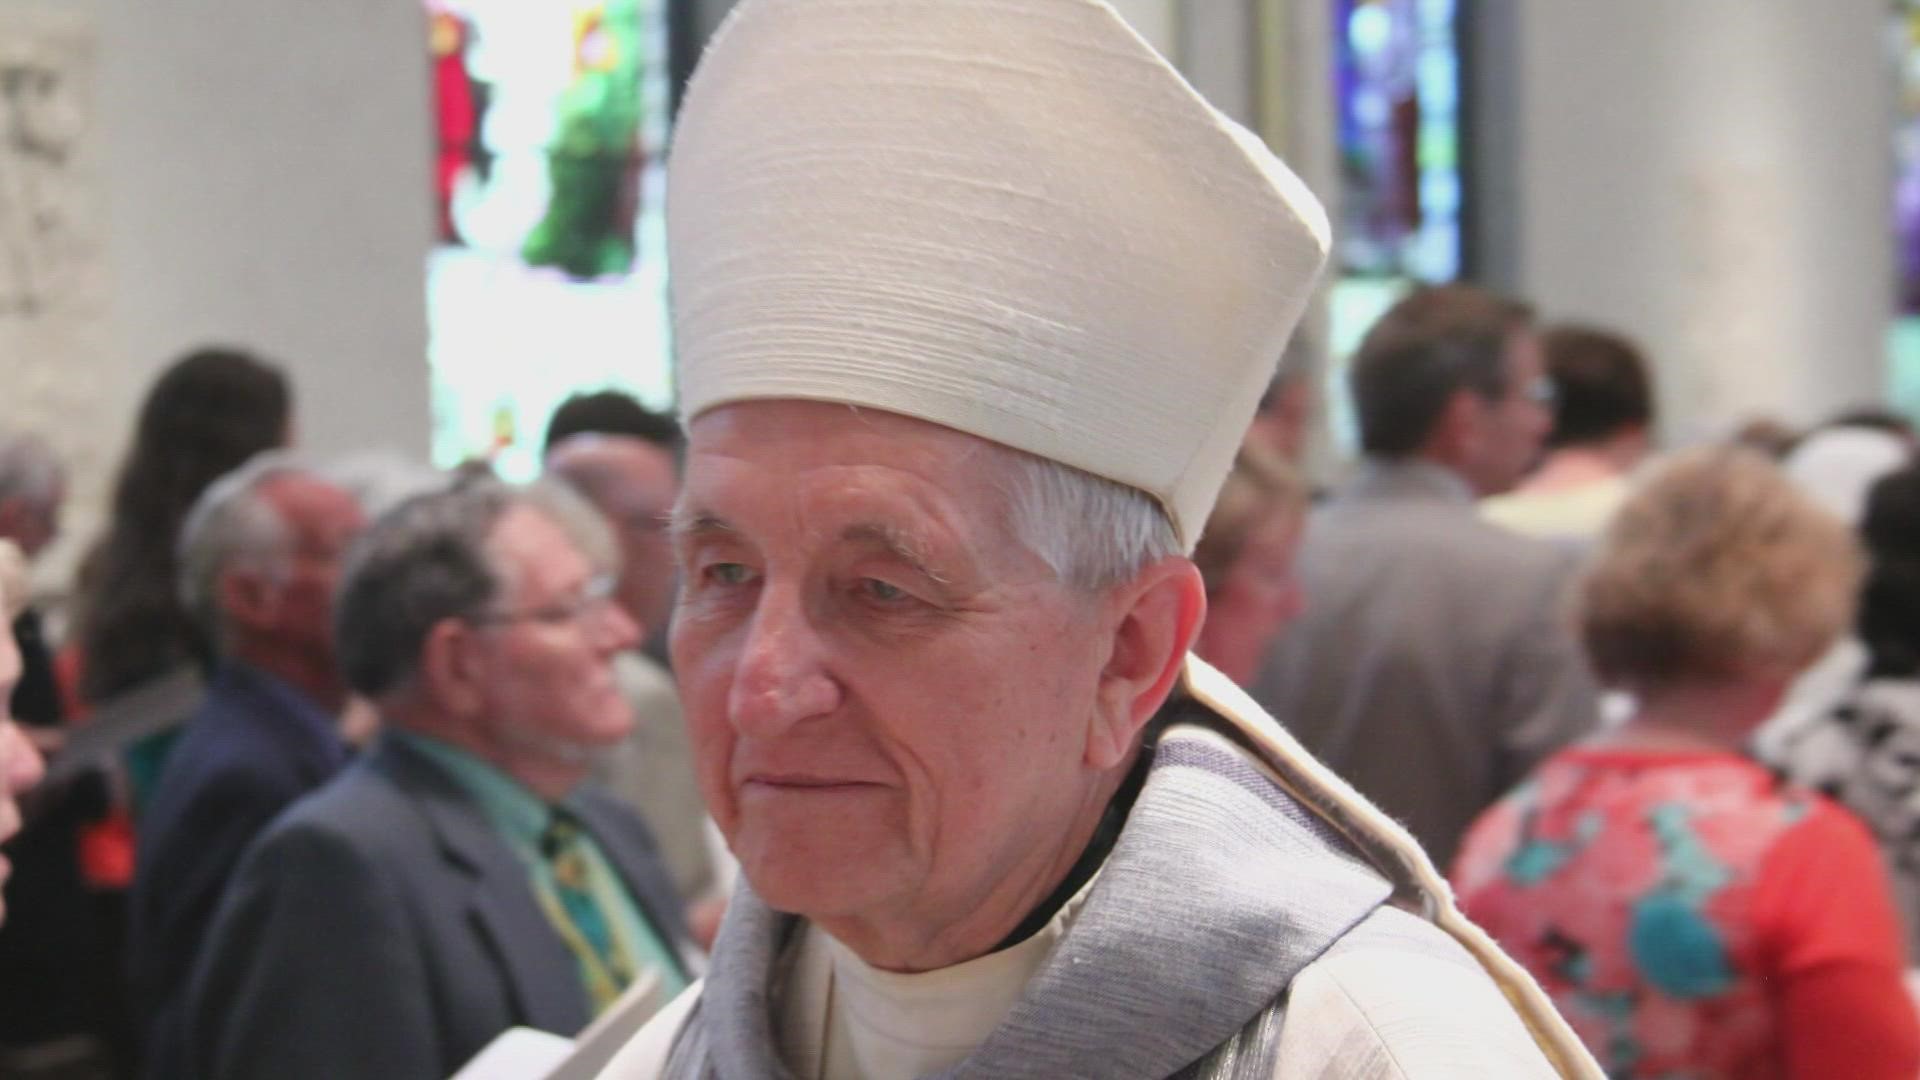 The longtime leader of the Diocese of Grand Rapids passed away on Ash Wednesday this week.